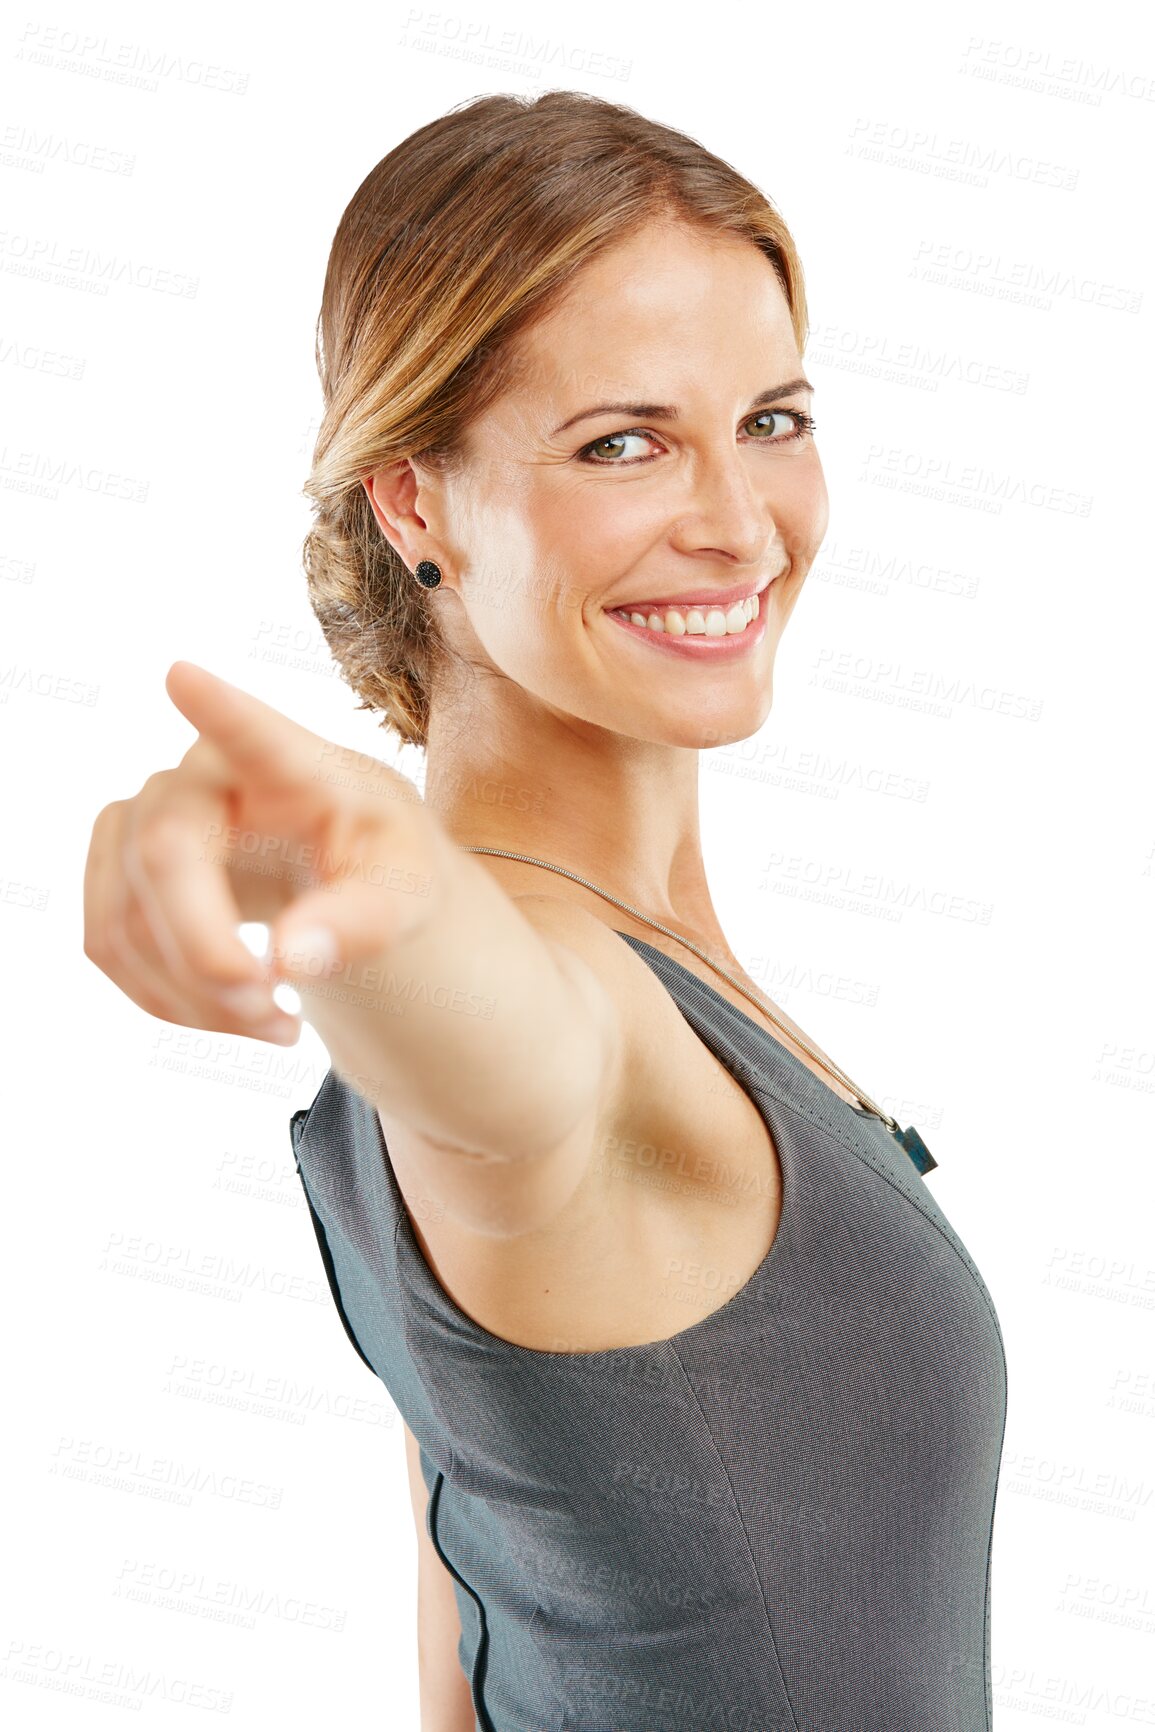 Buy stock photo Smile, portrait and woman pointing finger isolated on a transparent png background. Choice, hand gesture and happiness of person or female model with emoji for decision, direction or selection.